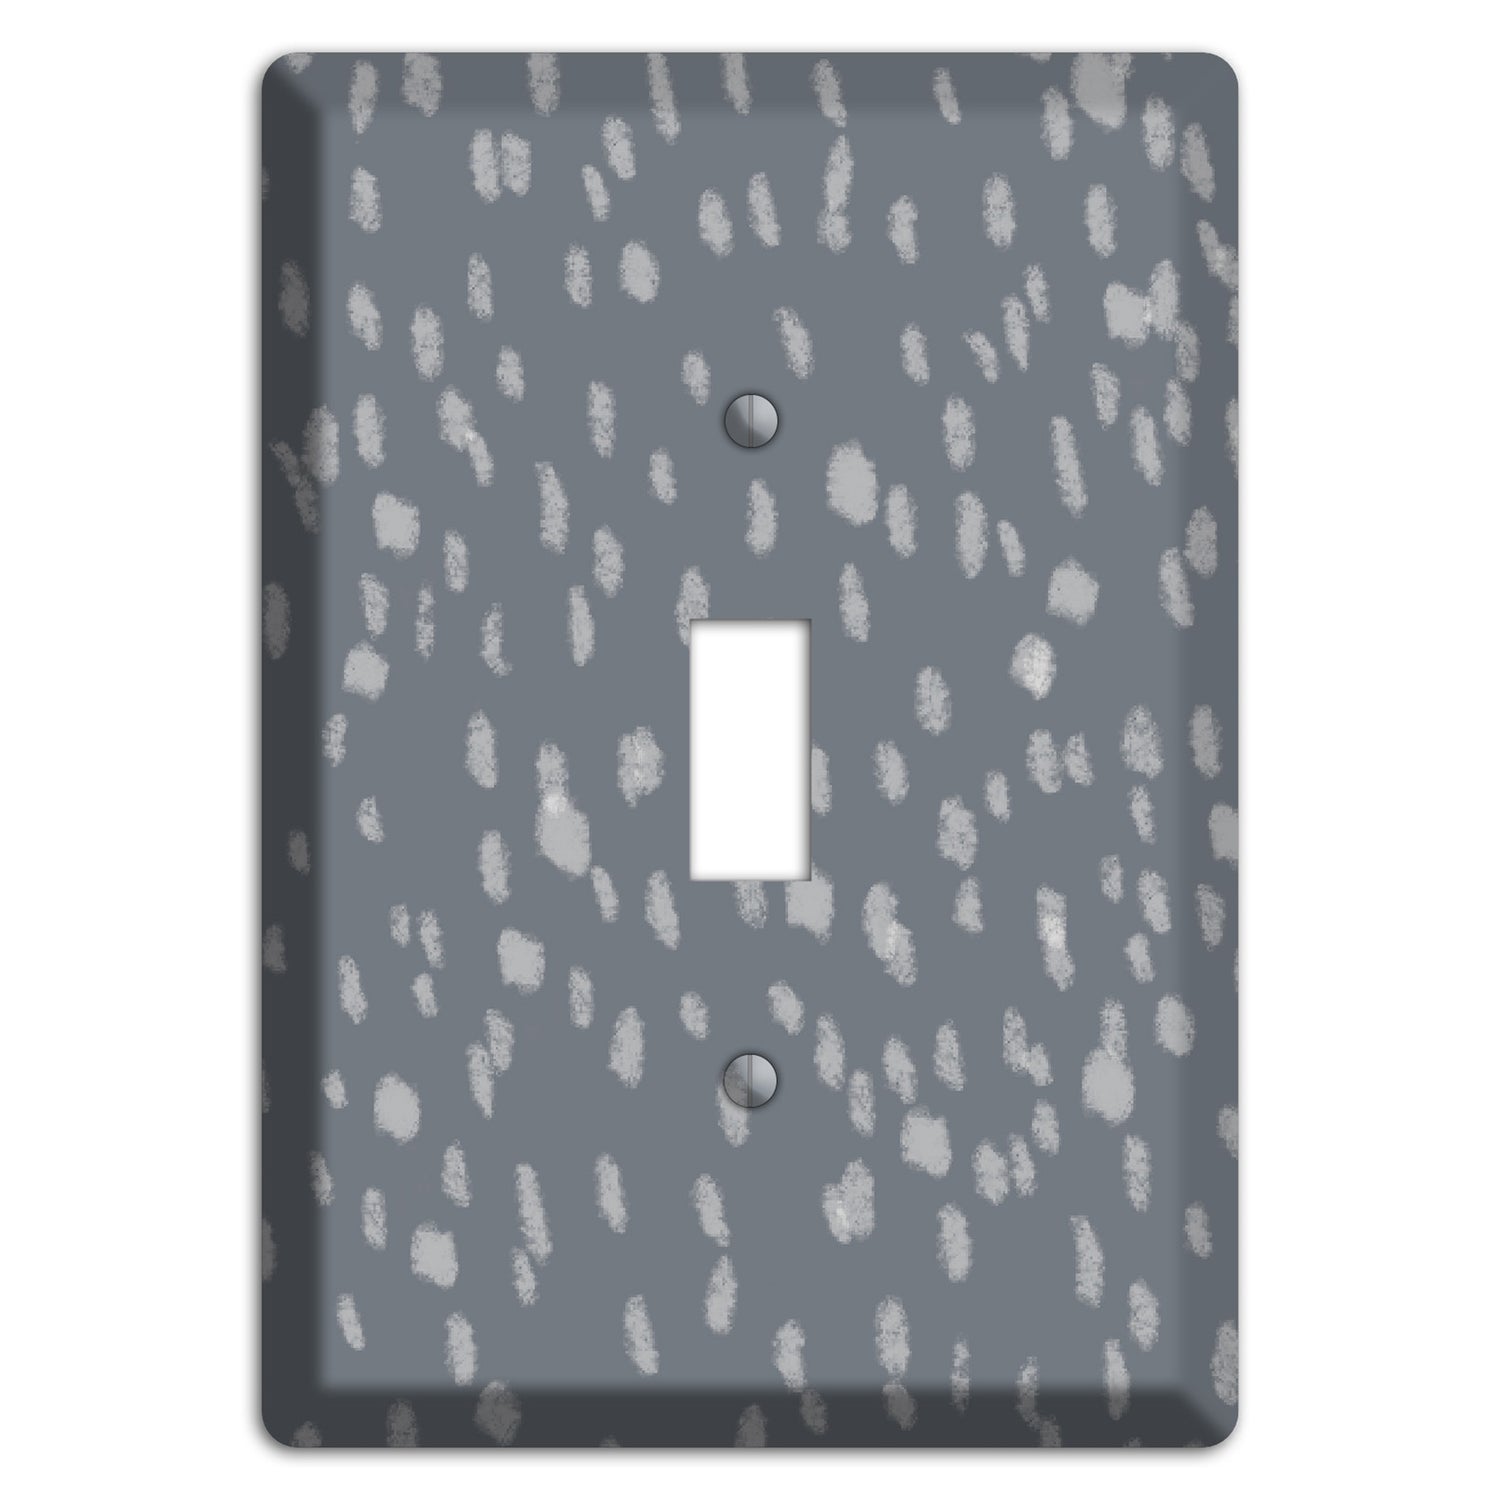 Gray and White Speckle Cover Plates